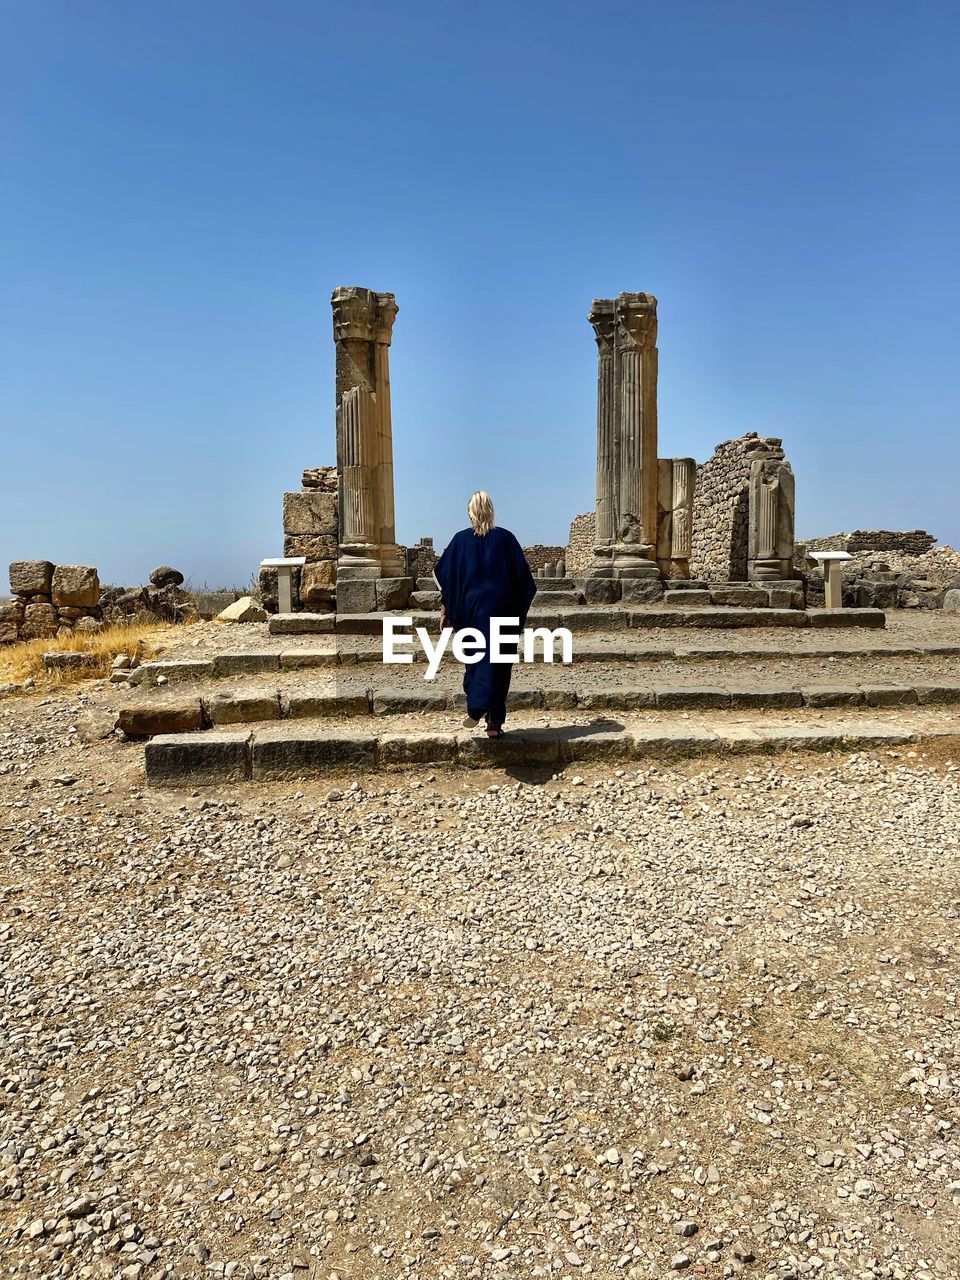 architecture, history, the past, sky, one person, ruins, monument, ancient history, ancient, travel, travel destinations, men, full length, old ruin, nature, landmark, built structure, adult, blue, temple, clear sky, archaeological site, outdoors, tourism, ancient civilization, rock, rear view, day, ruined, religion, sunny, temple - building, archaeology, land, lifestyles, standing, staircase, leisure activity, old, building exterior